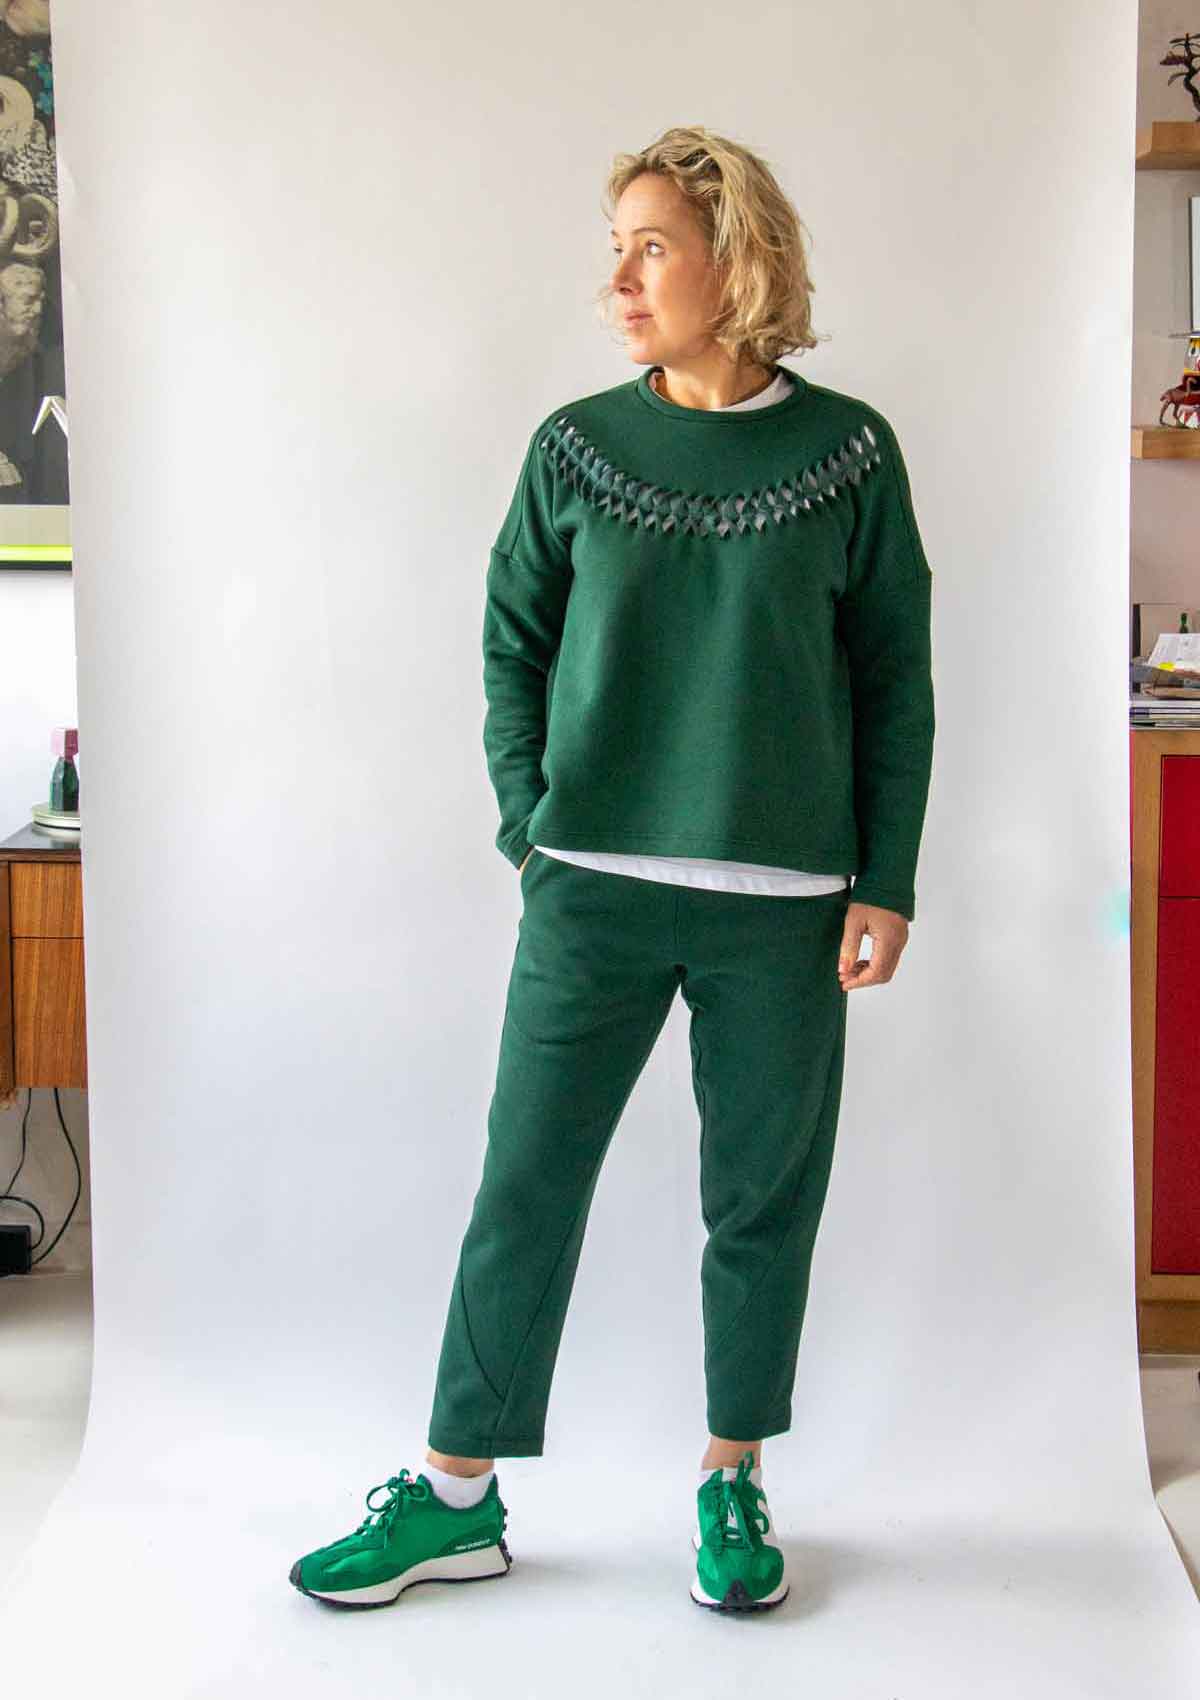 2.	Woman looking to her right, with short wavy blond hair, wearing the Asmuss Anni Sweatshirt in Trekking Green with the Cut Twist and Stitch detailing and the Asmuss Curve Joggers in Trekking Green and green trainers